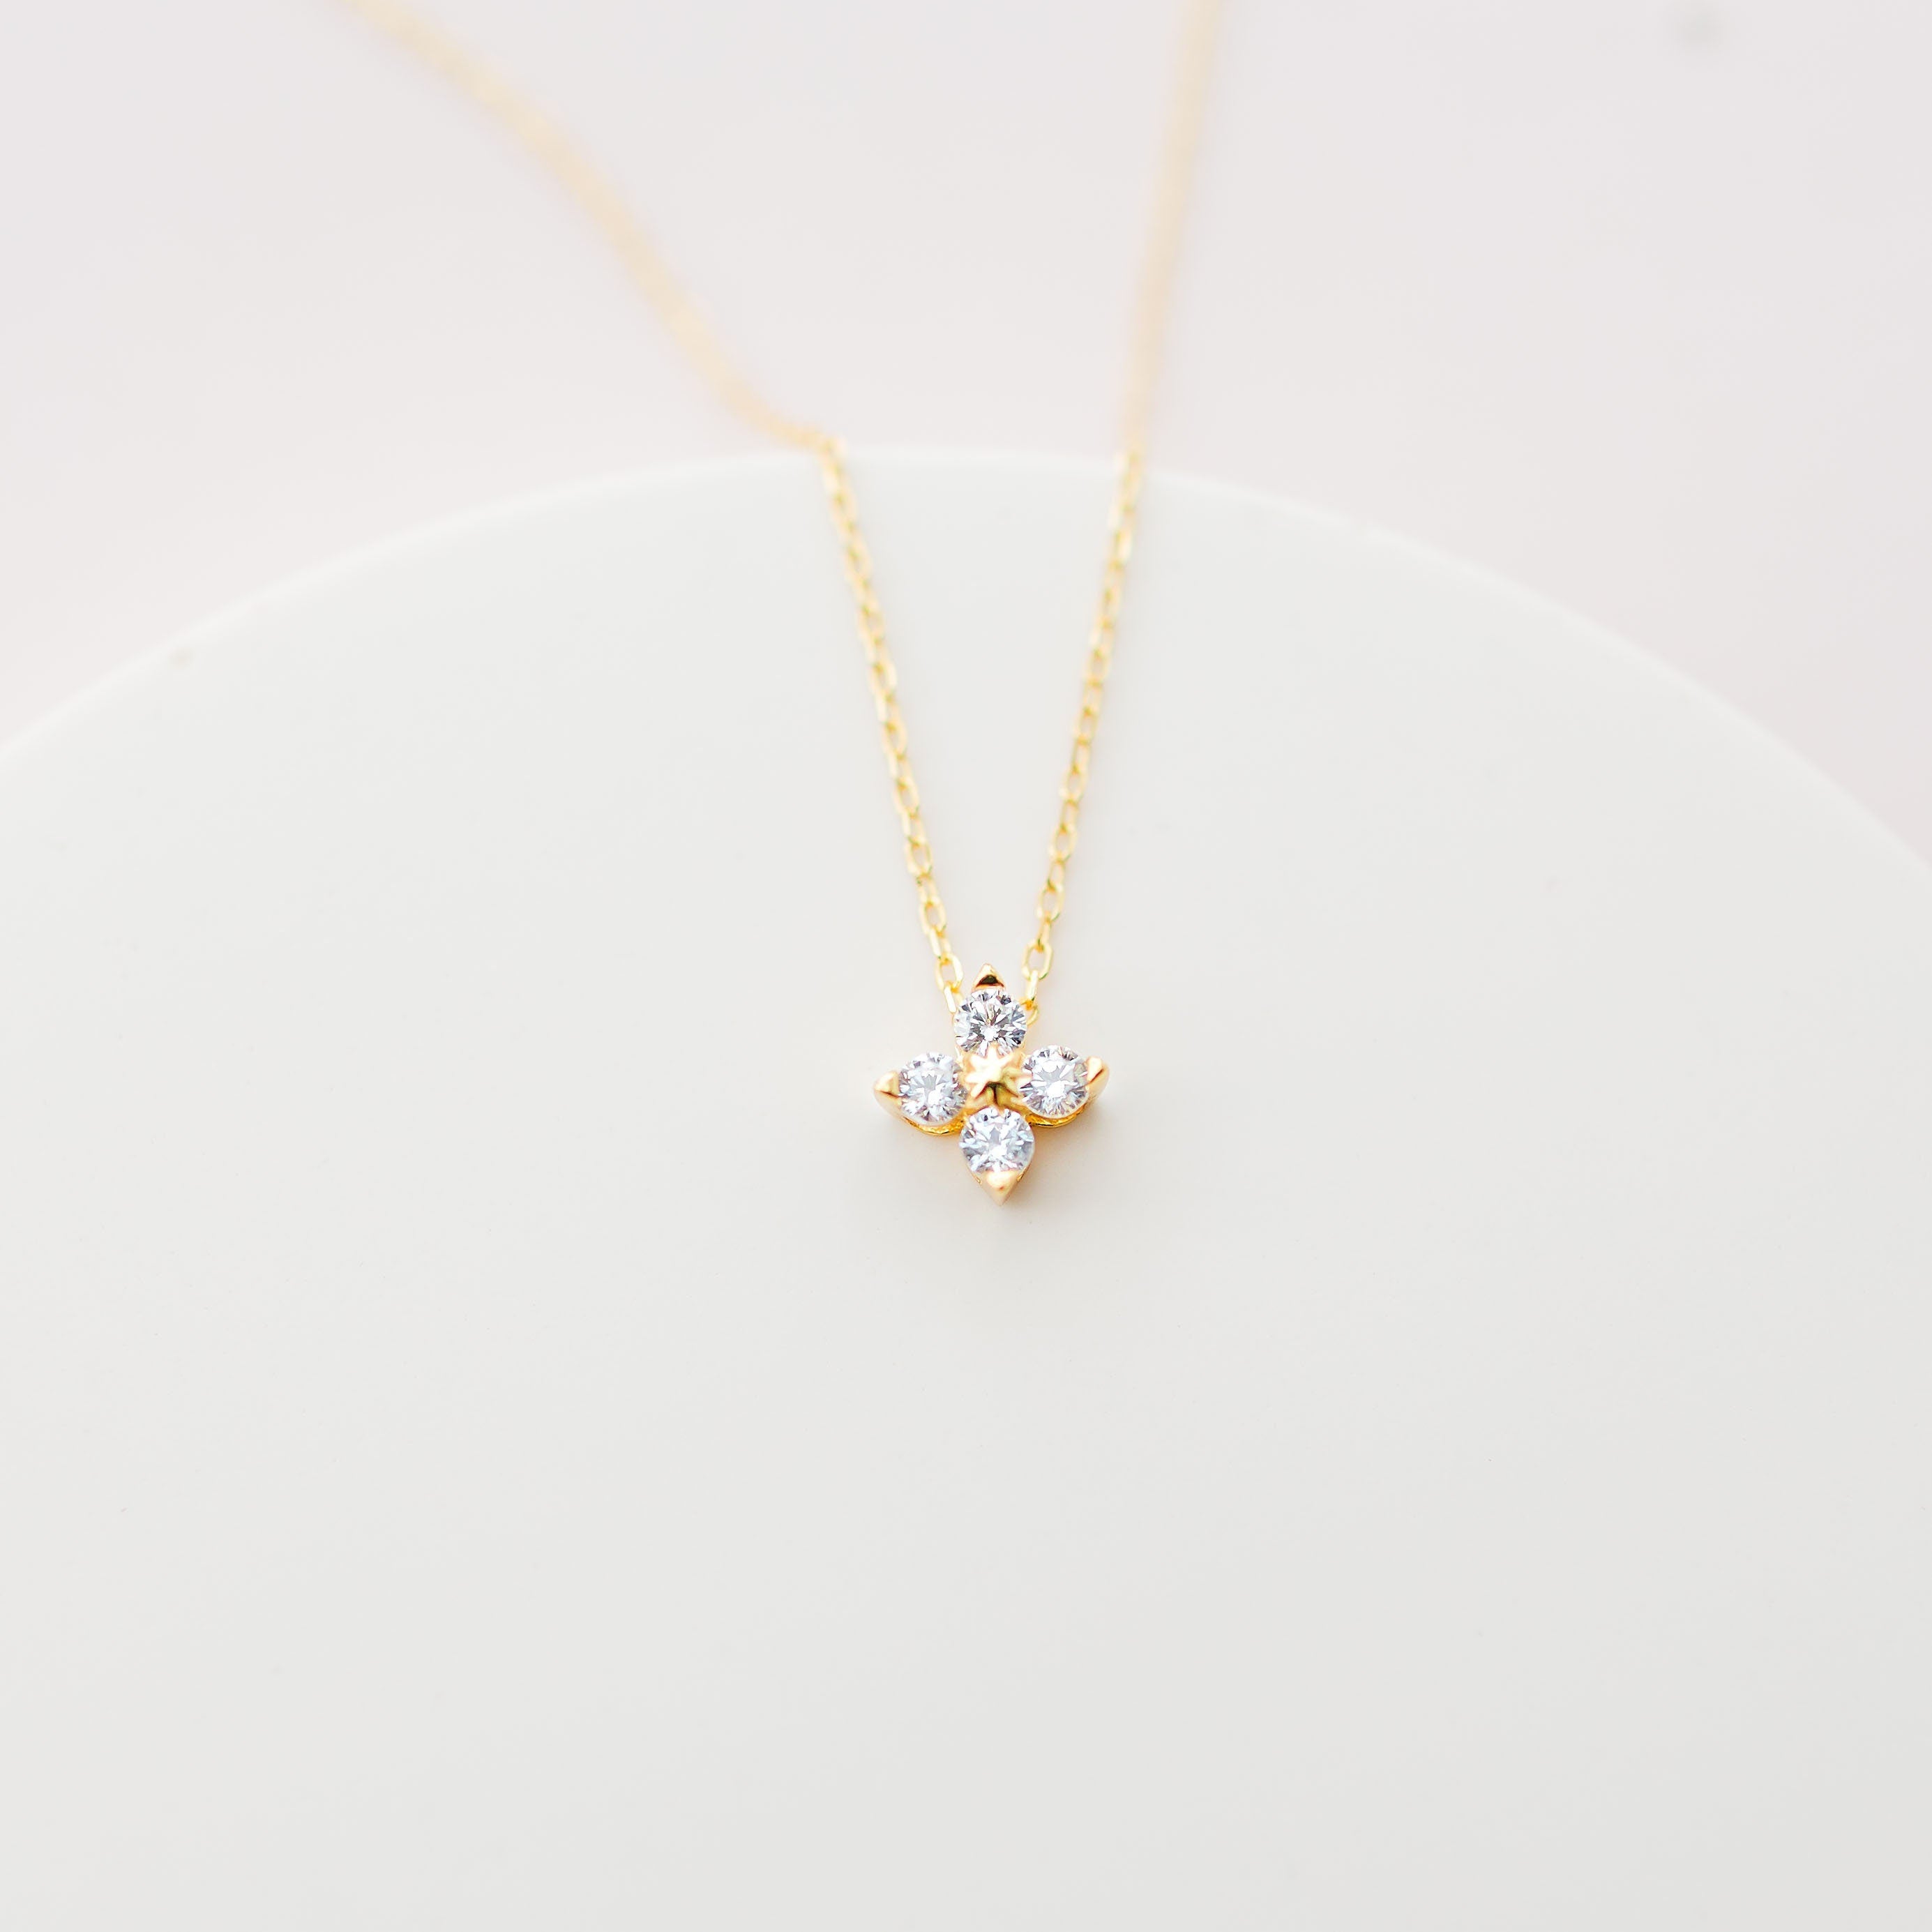 CHLOE // Gold dainty gold floral necklace